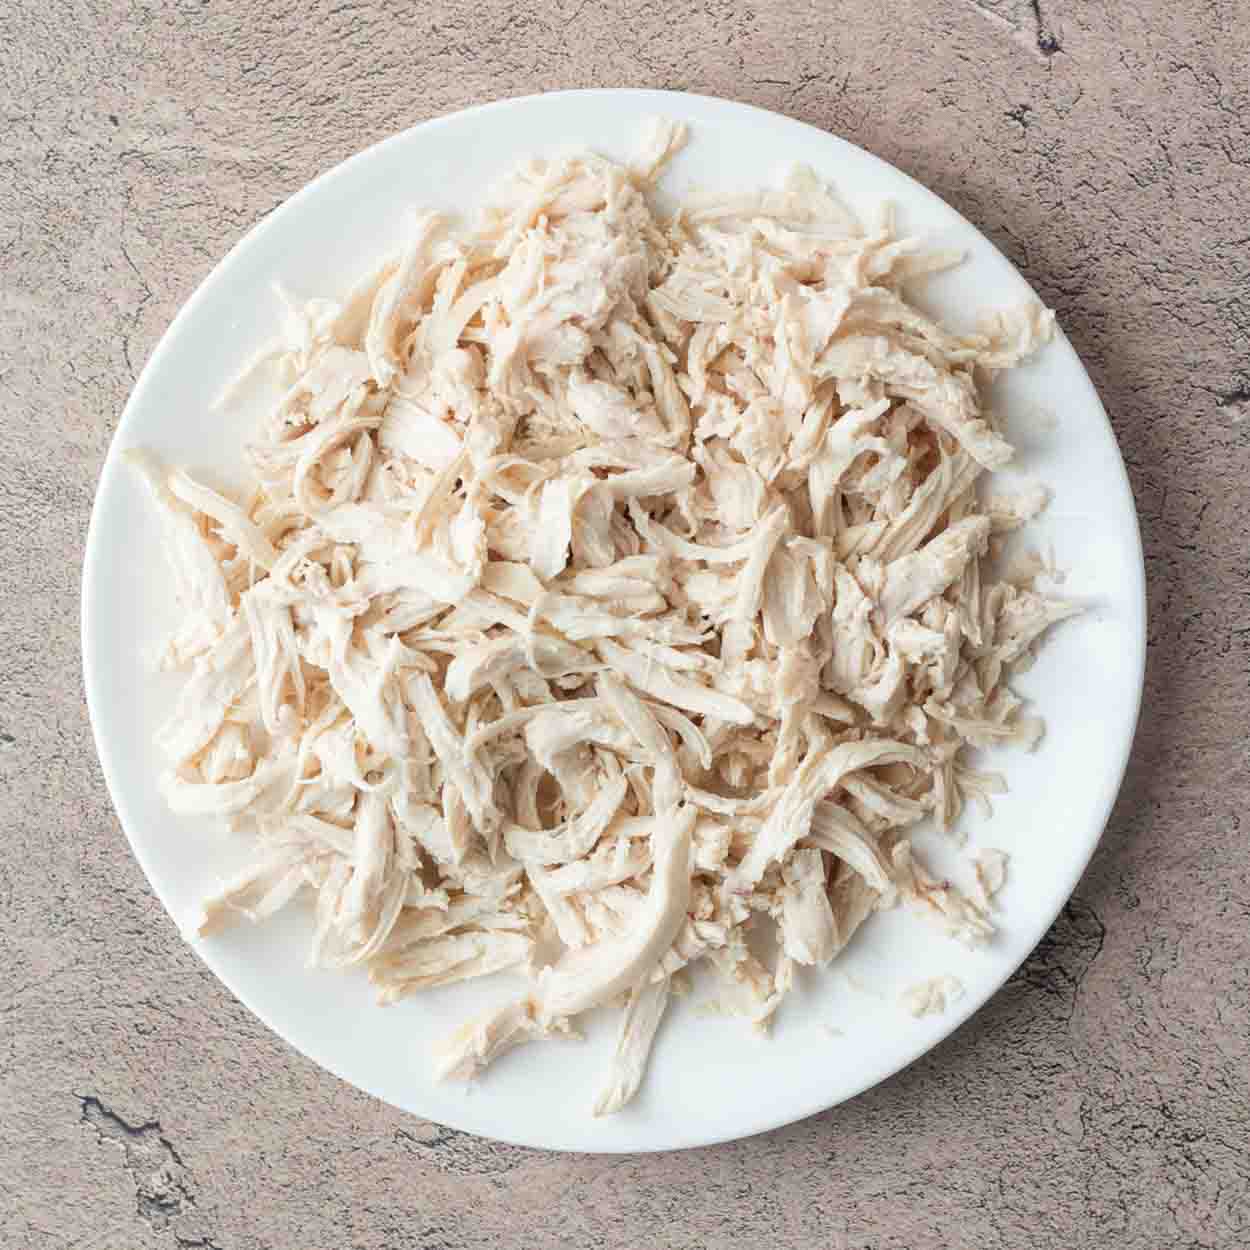 A plate containing cooked shredded chicken.